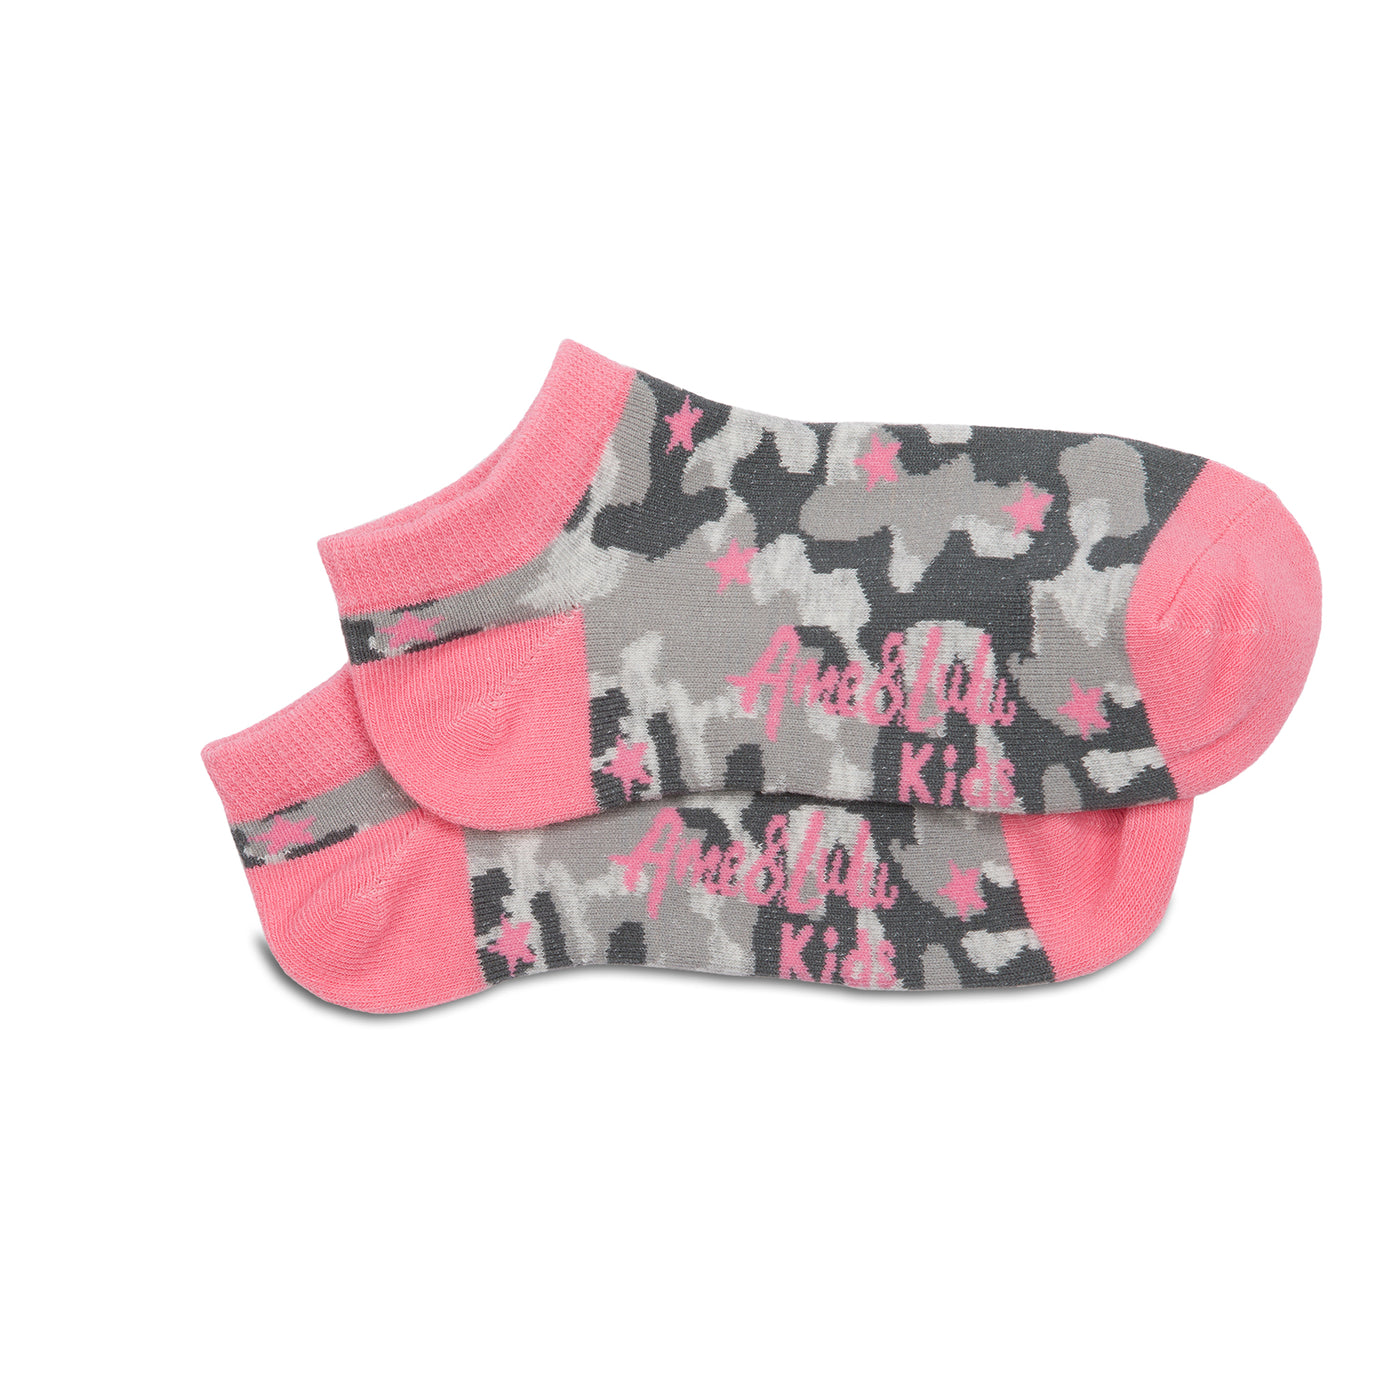 pair of grey camo kids socks with light pink heel and toes, and pink stars stitched on to socks